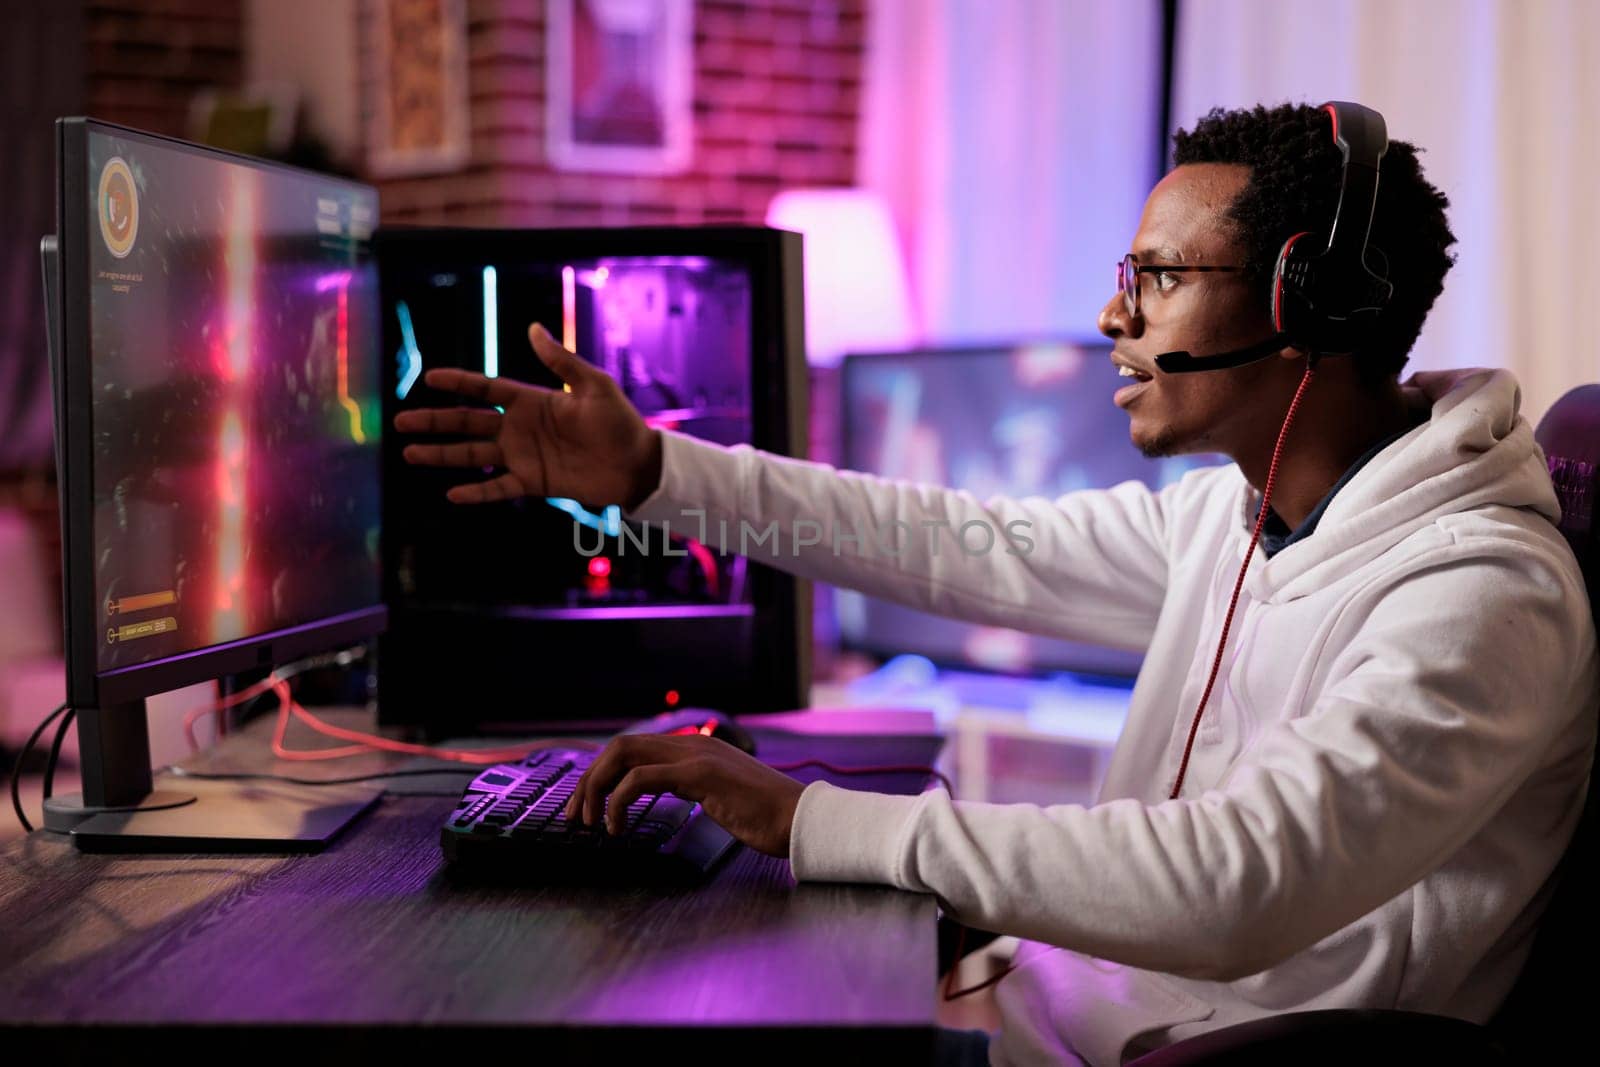 Frustrated gamer losing online multiplayer spaceship arcade racing videogame on powerful gaming PC. African american man shocked to see he is outskilled by more capable players